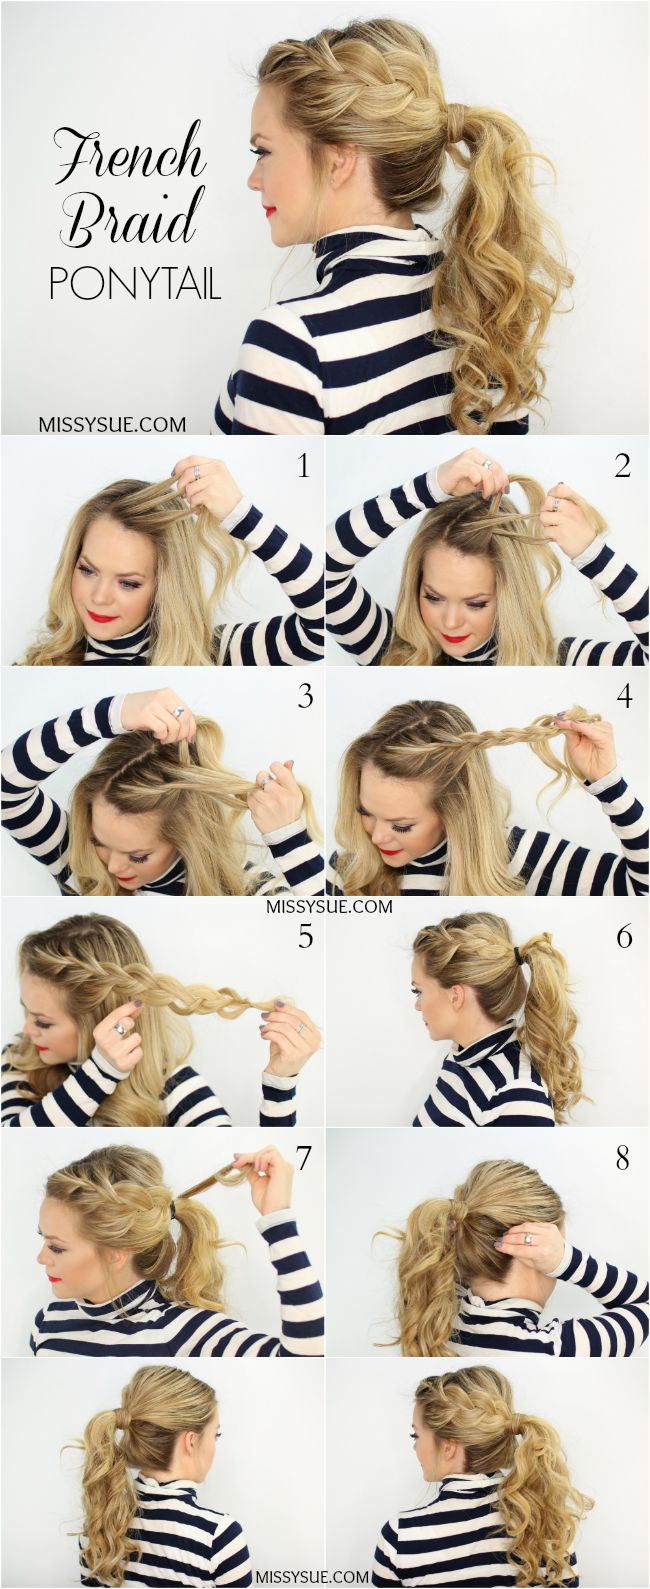 Side French Braid Ponytail Hairstyle Tutorial